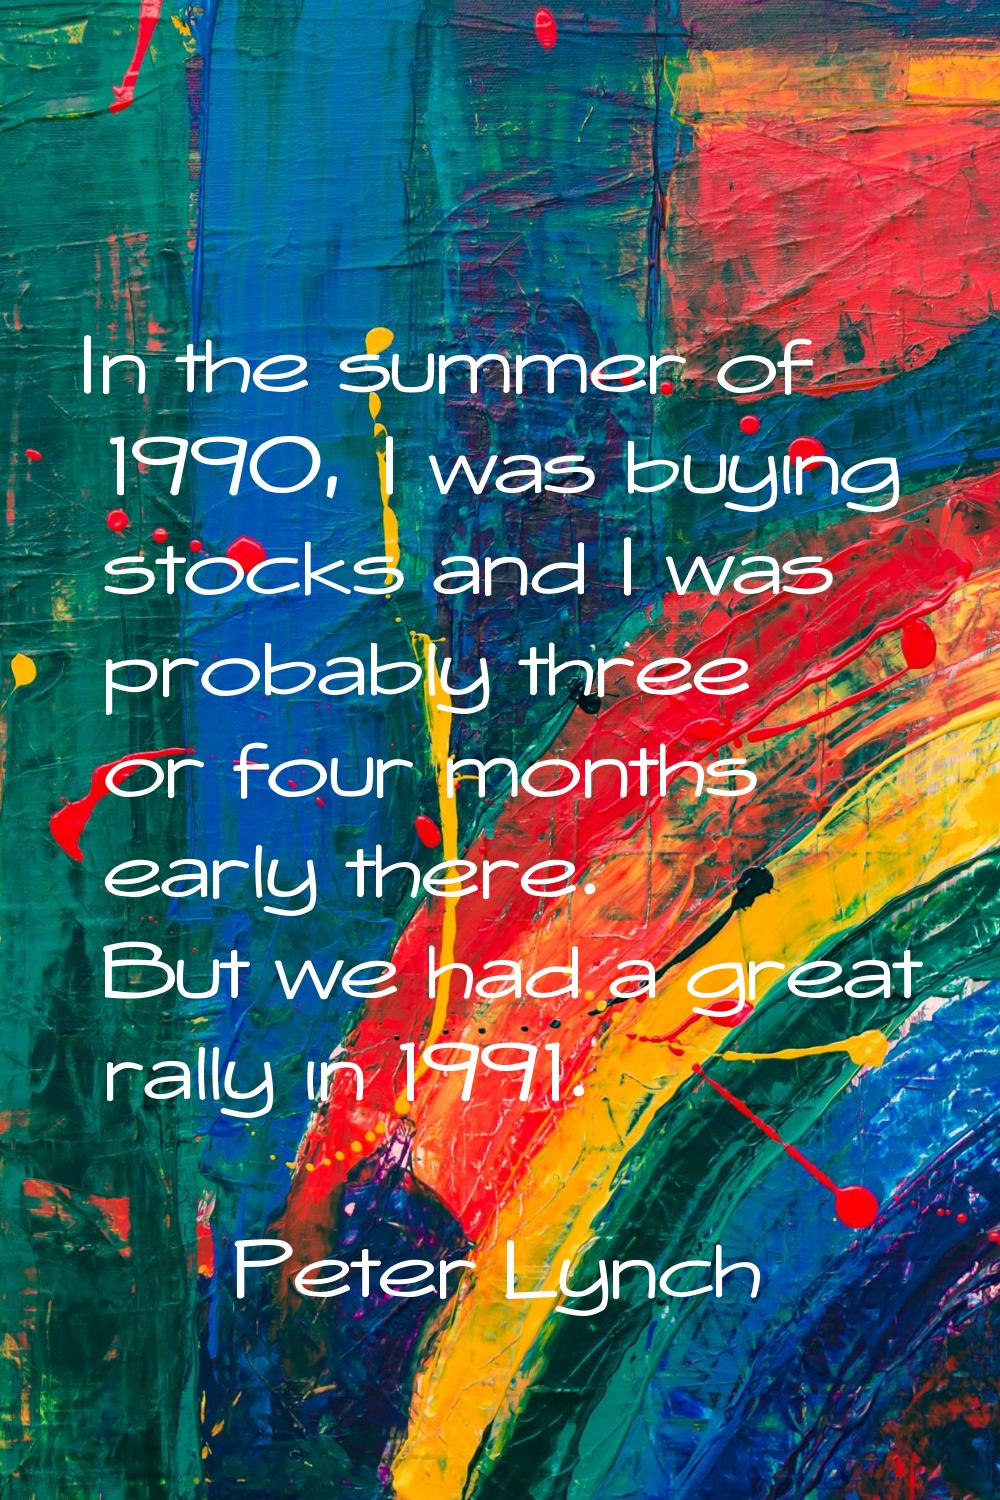 In the summer of 1990, I was buying stocks and I was probably three or four months early there. But